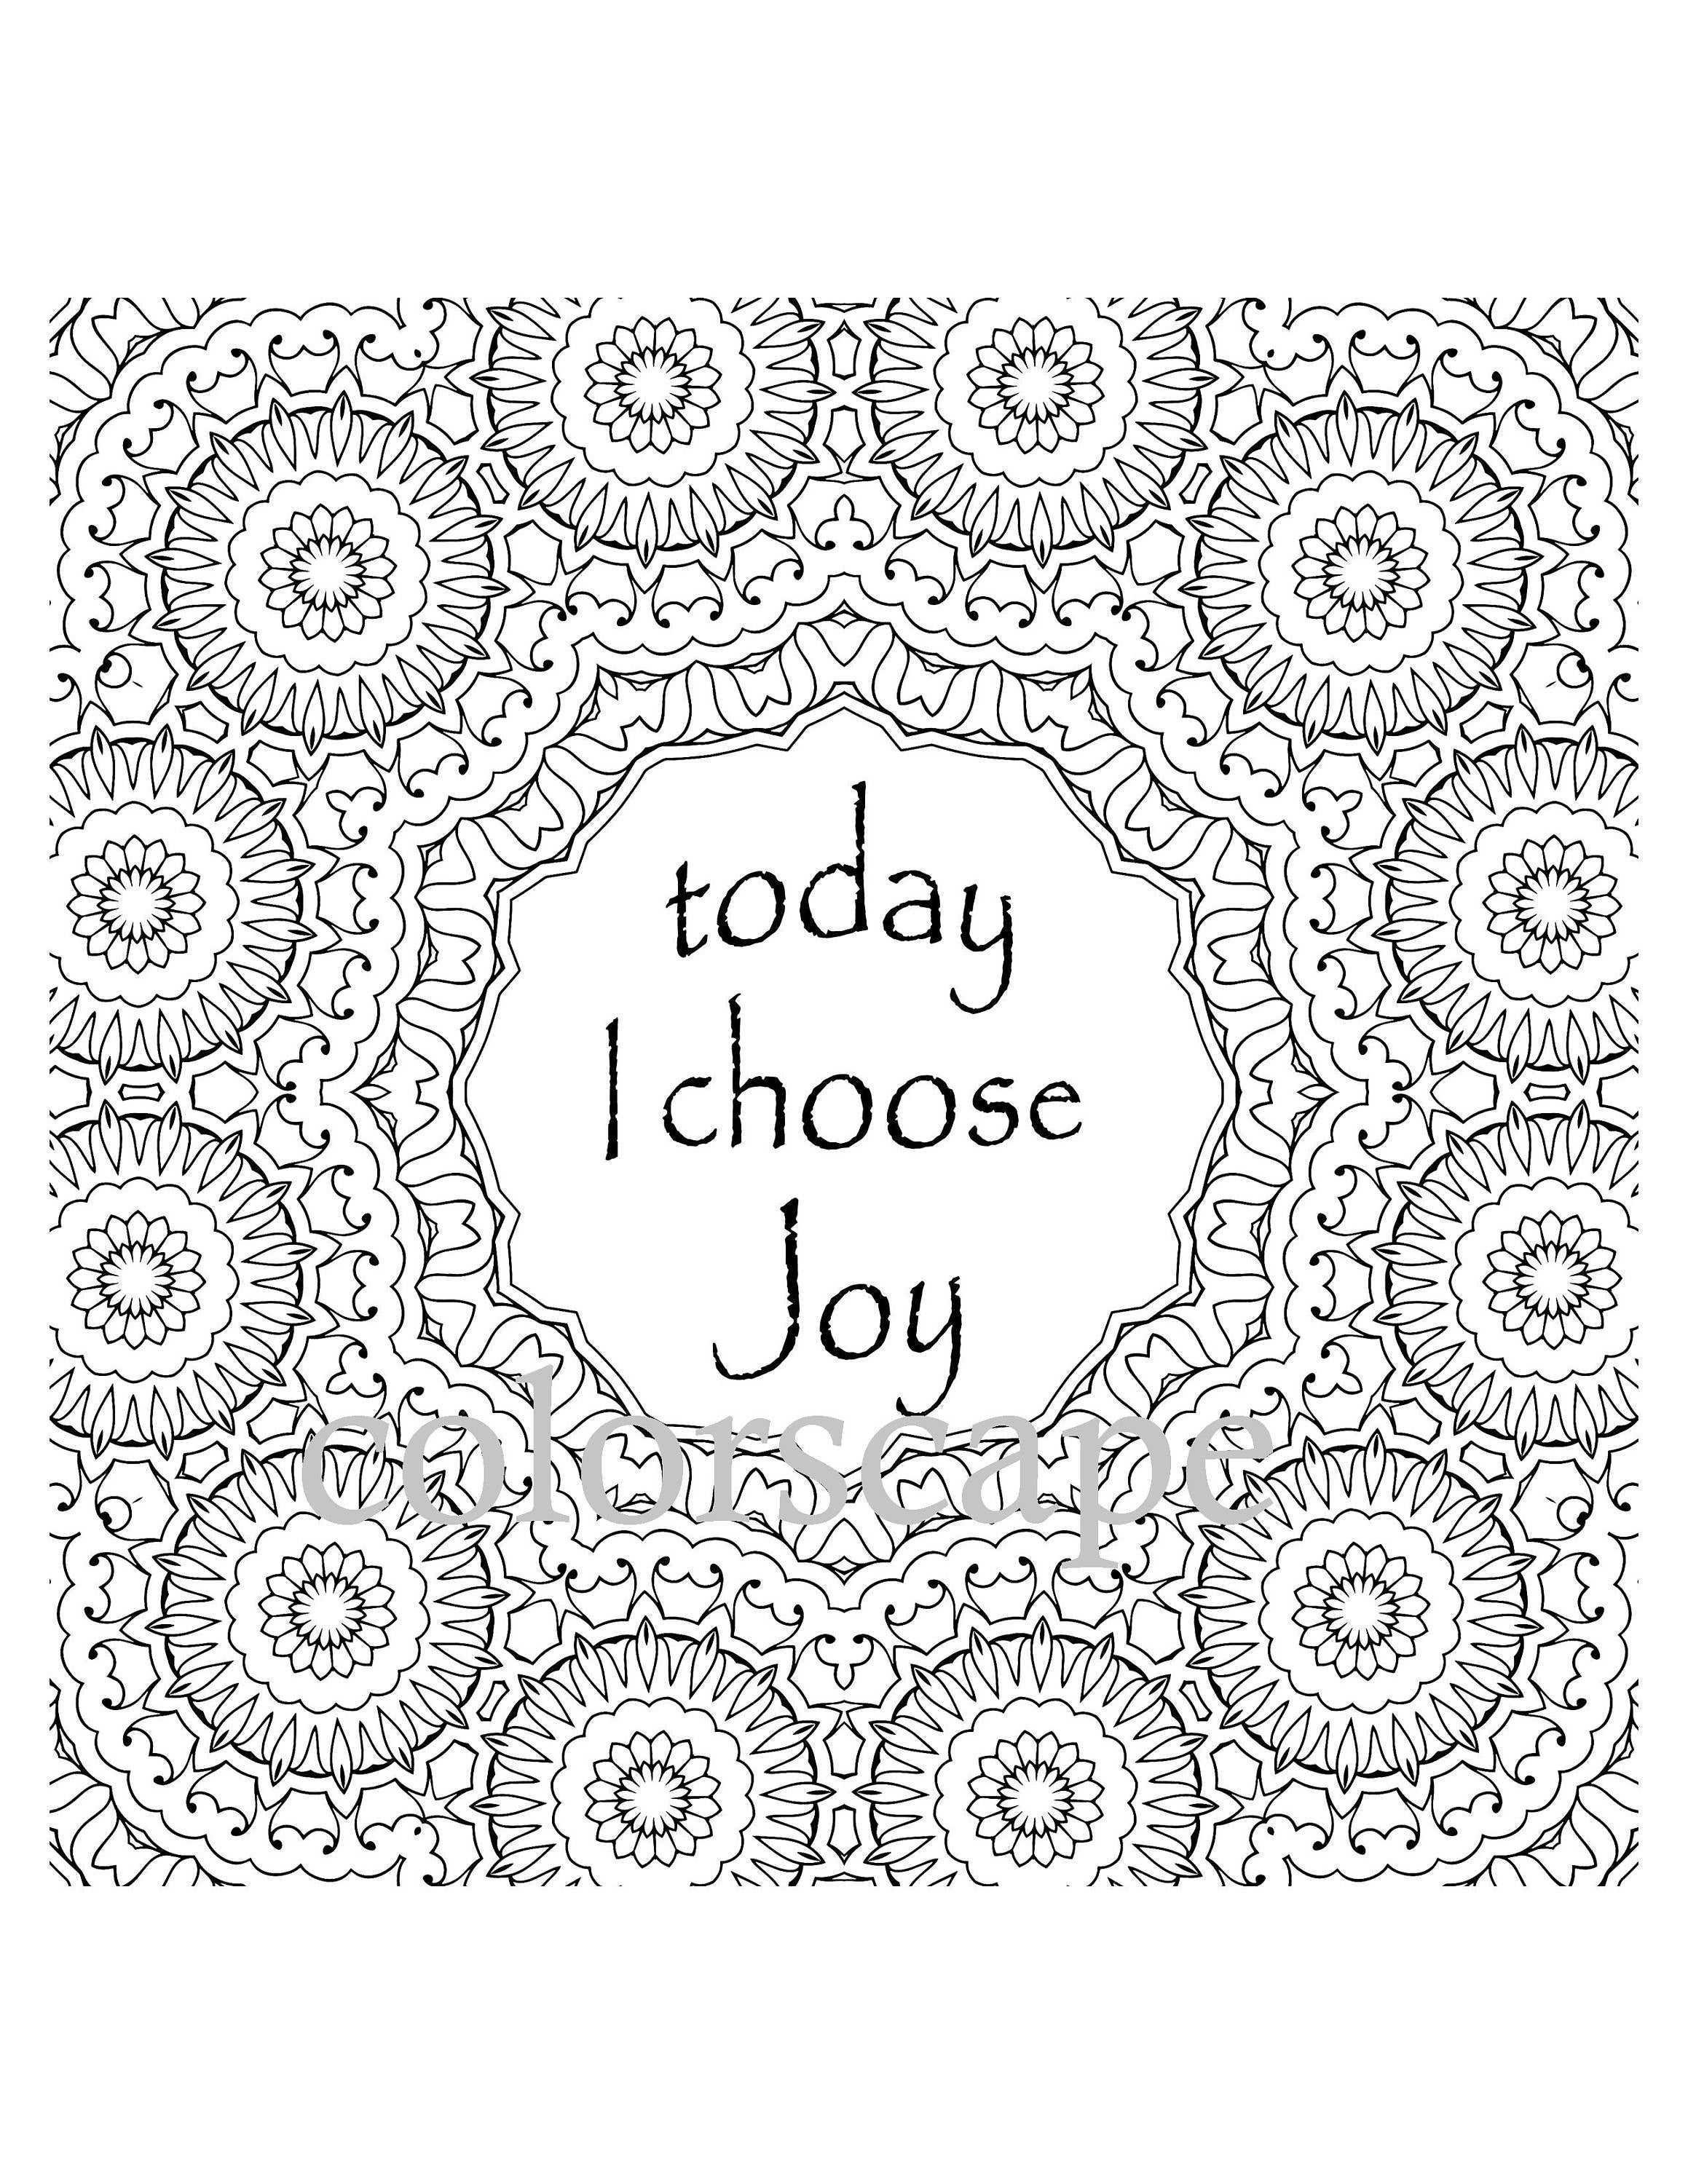 Joy Free Printable Coloring Page An Adult Coloring Page With | Images ...